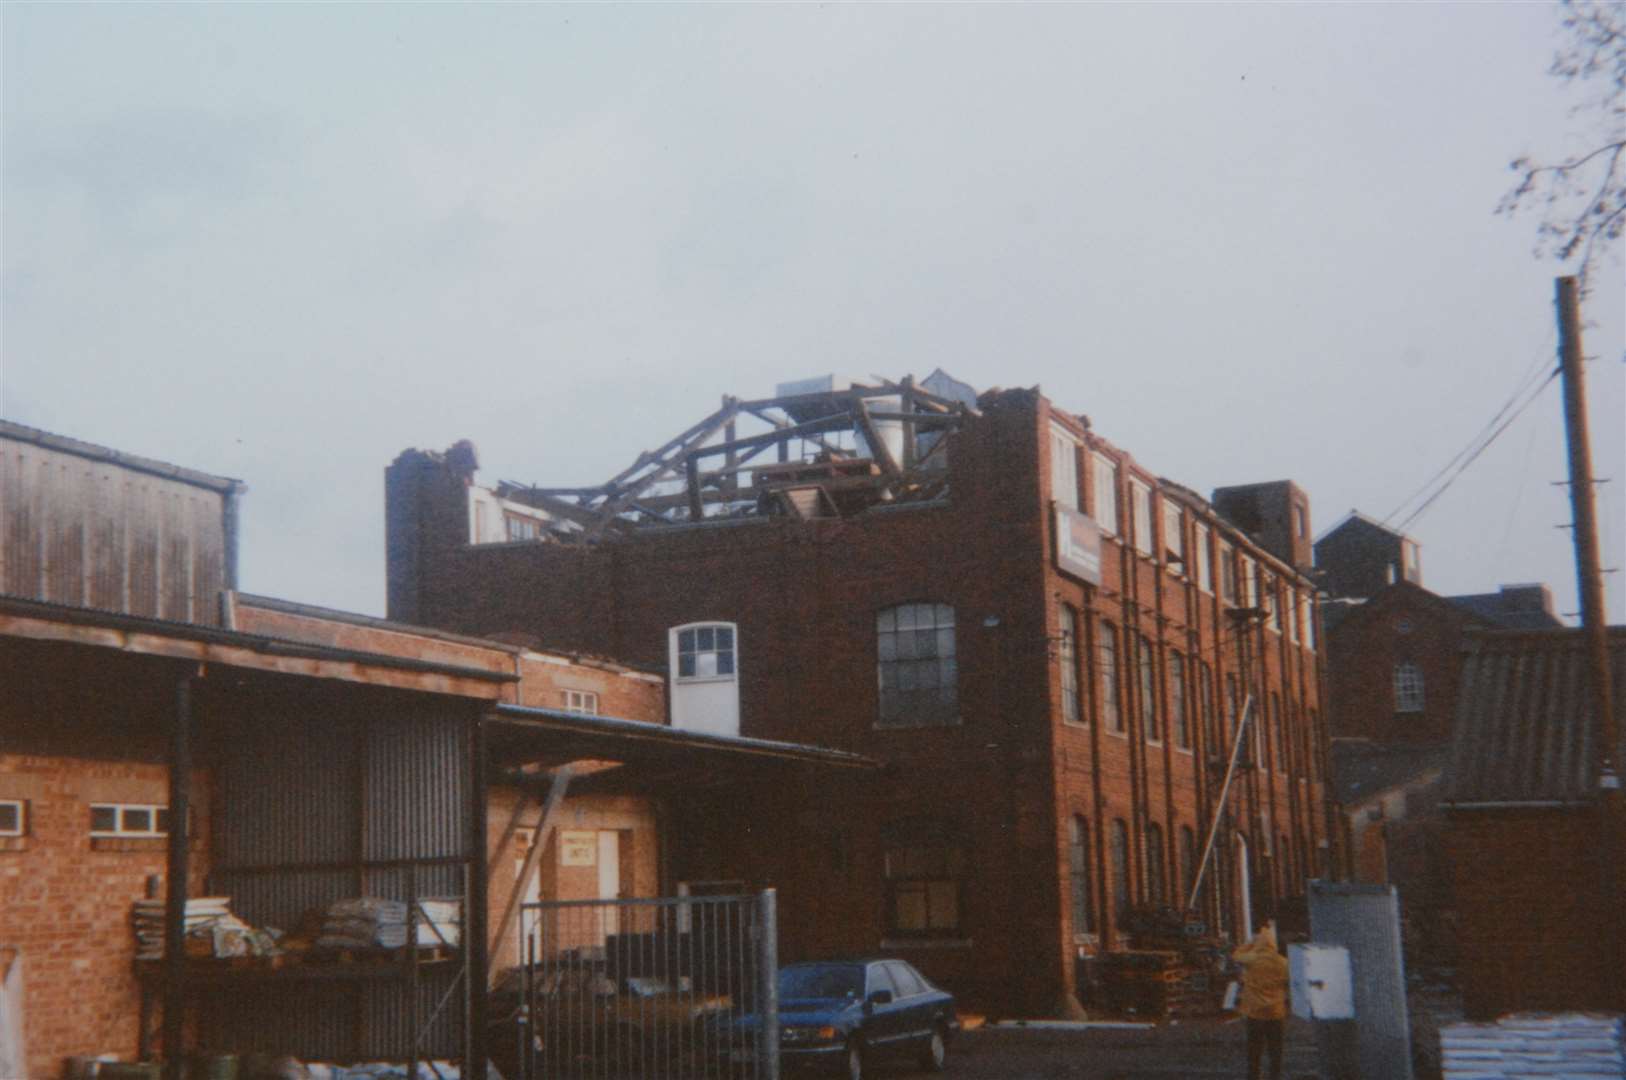 Holter's Mill damaged in the great storm of 1987